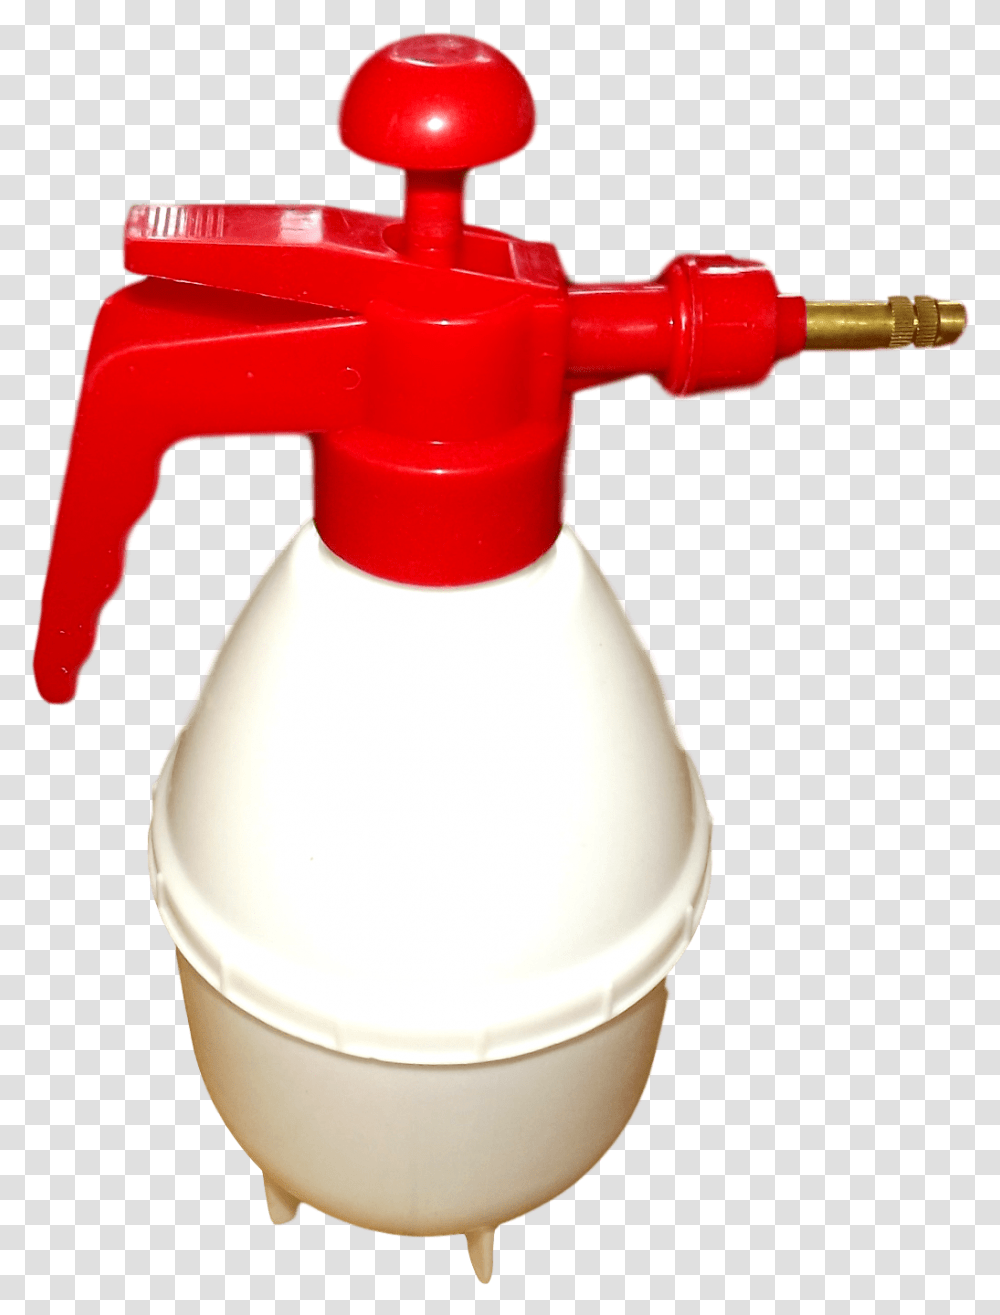 Water Spray Water Spray Bottle With Pump Robot Tool, Fire Hydrant, Spray Can, Tin, Label Transparent Png